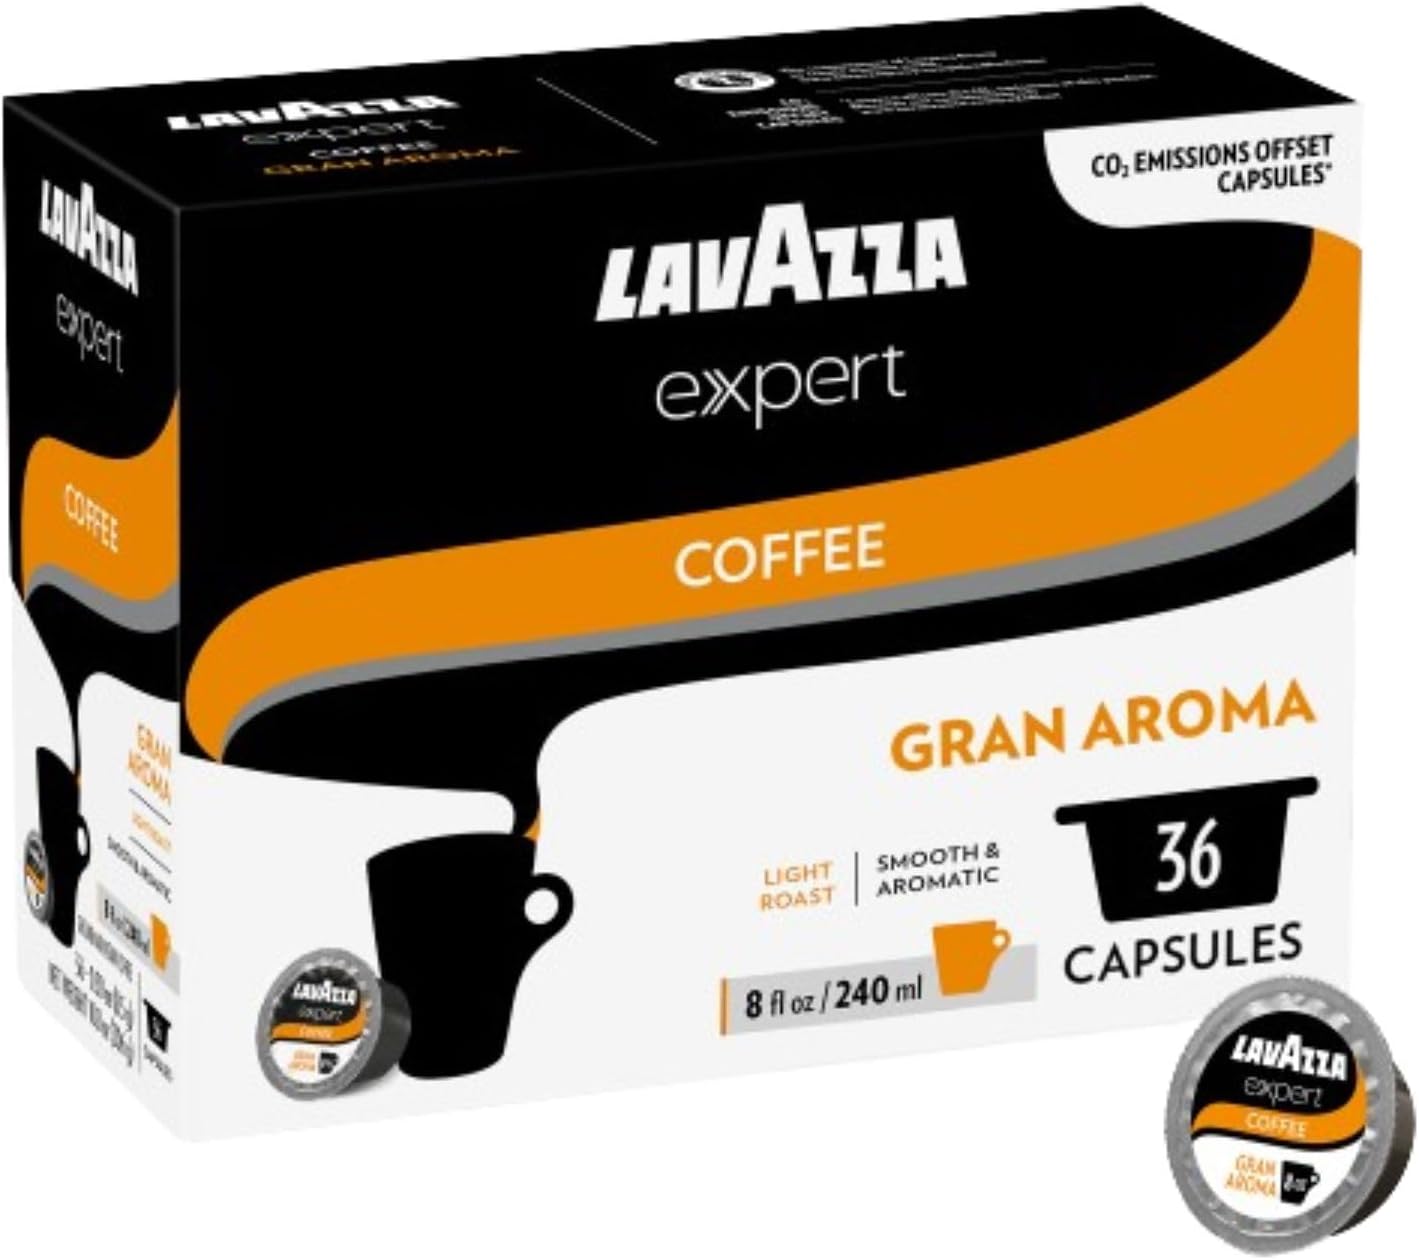 Lavazza Expert Gran Aroma Coffee Capsules, Sweet Taste, Light Roast, Intensity 4 out 10, notes of floral and fruit, Aromatic blend, Coffee Preparation, Blended and Roasted in Italy, (36 Capsules)